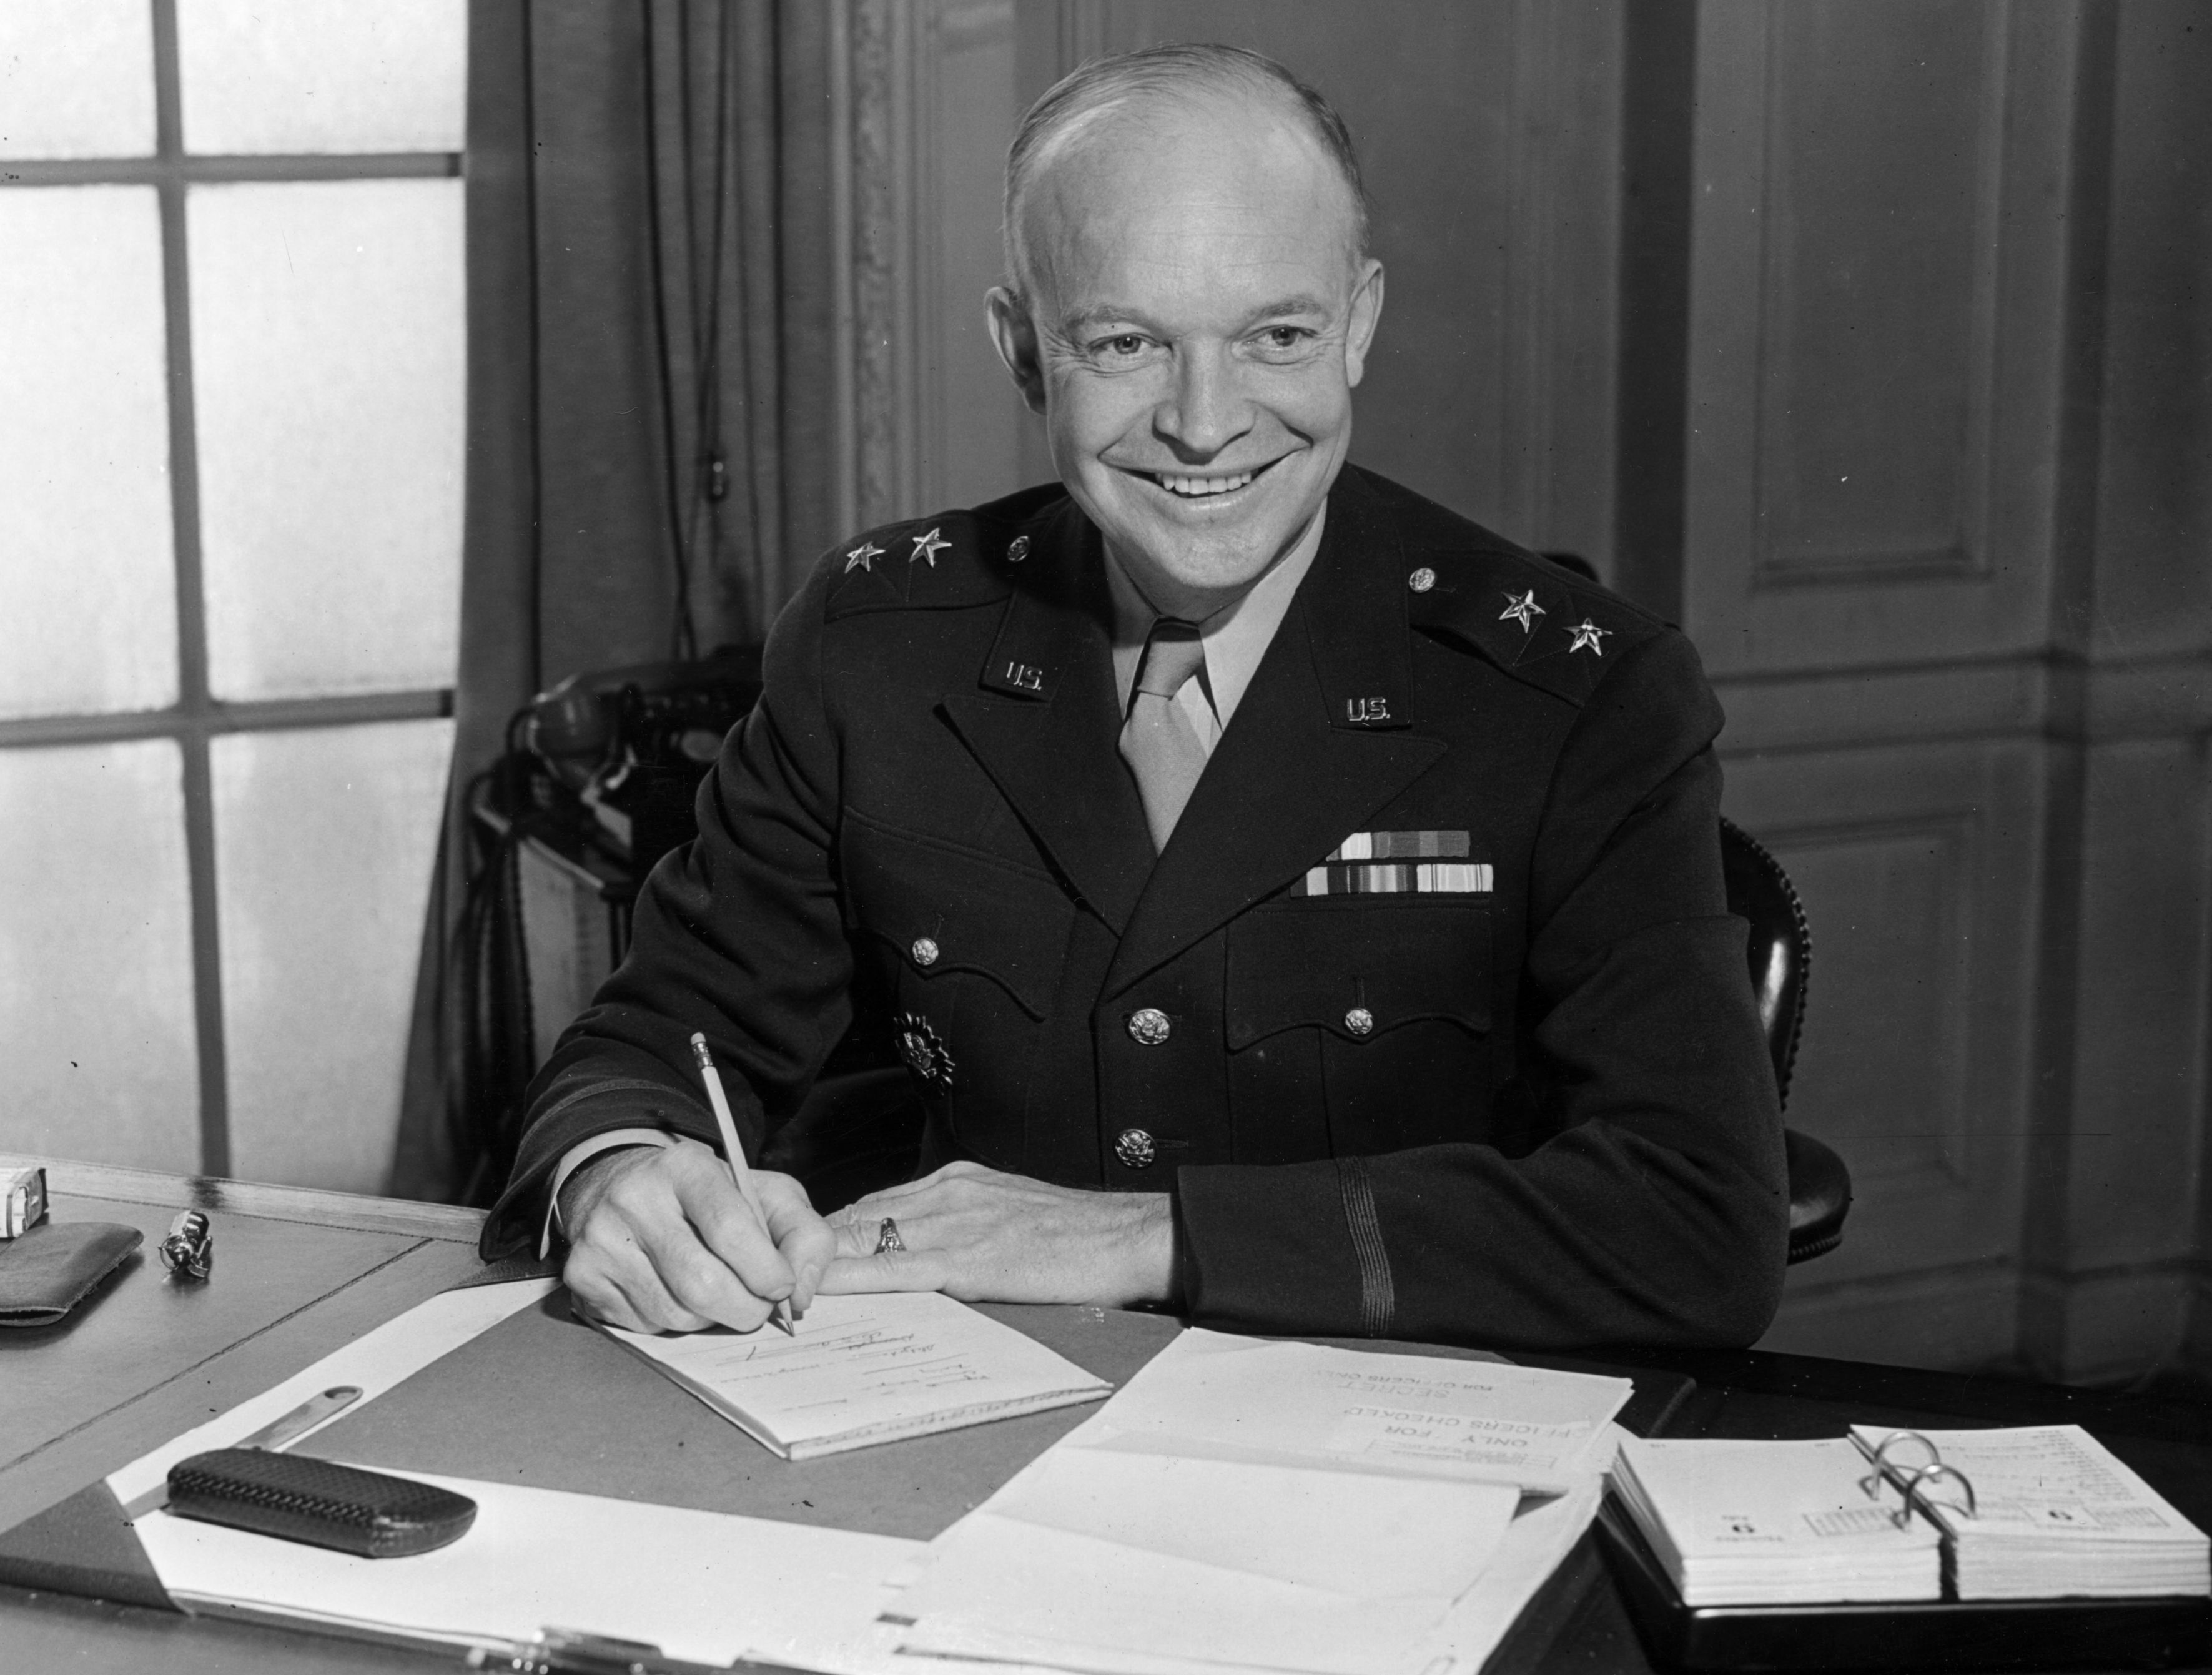 Dwight D Eisenhower in his office IN 1942